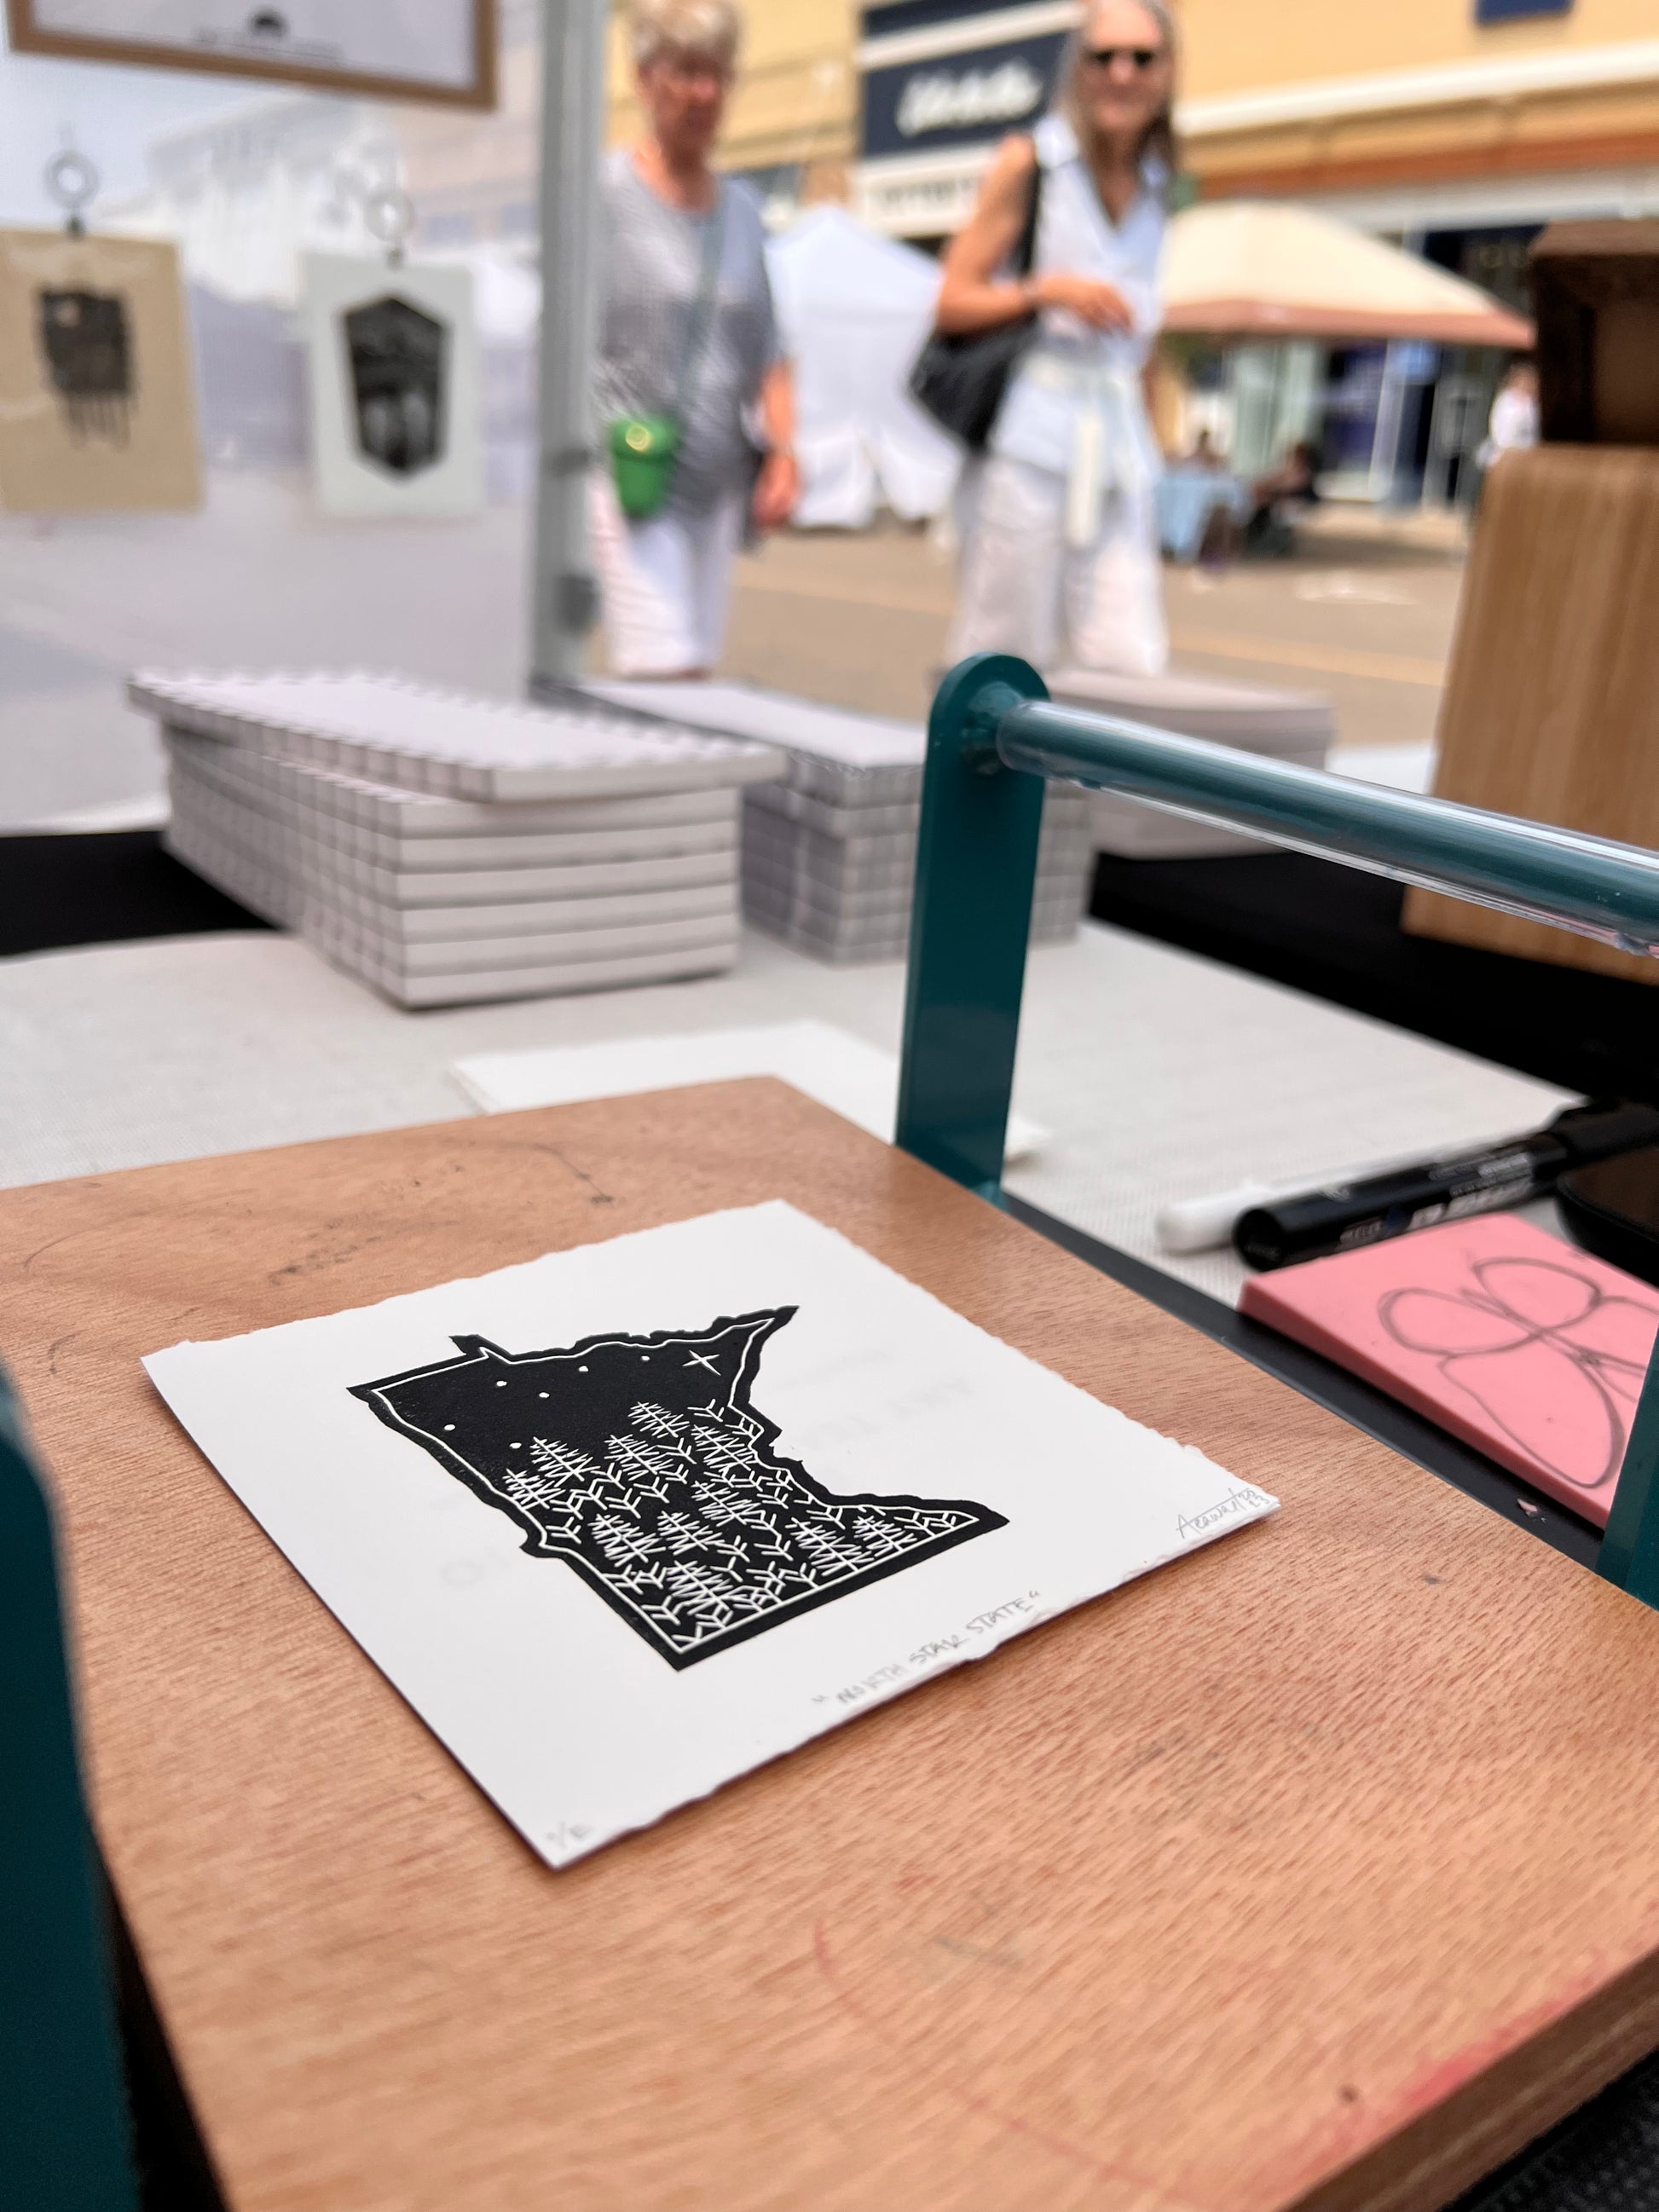 A "North Star State" mini print sitting on a tabletop press. In the background are other parts of the tablescape and people walking by on the other side of the table.